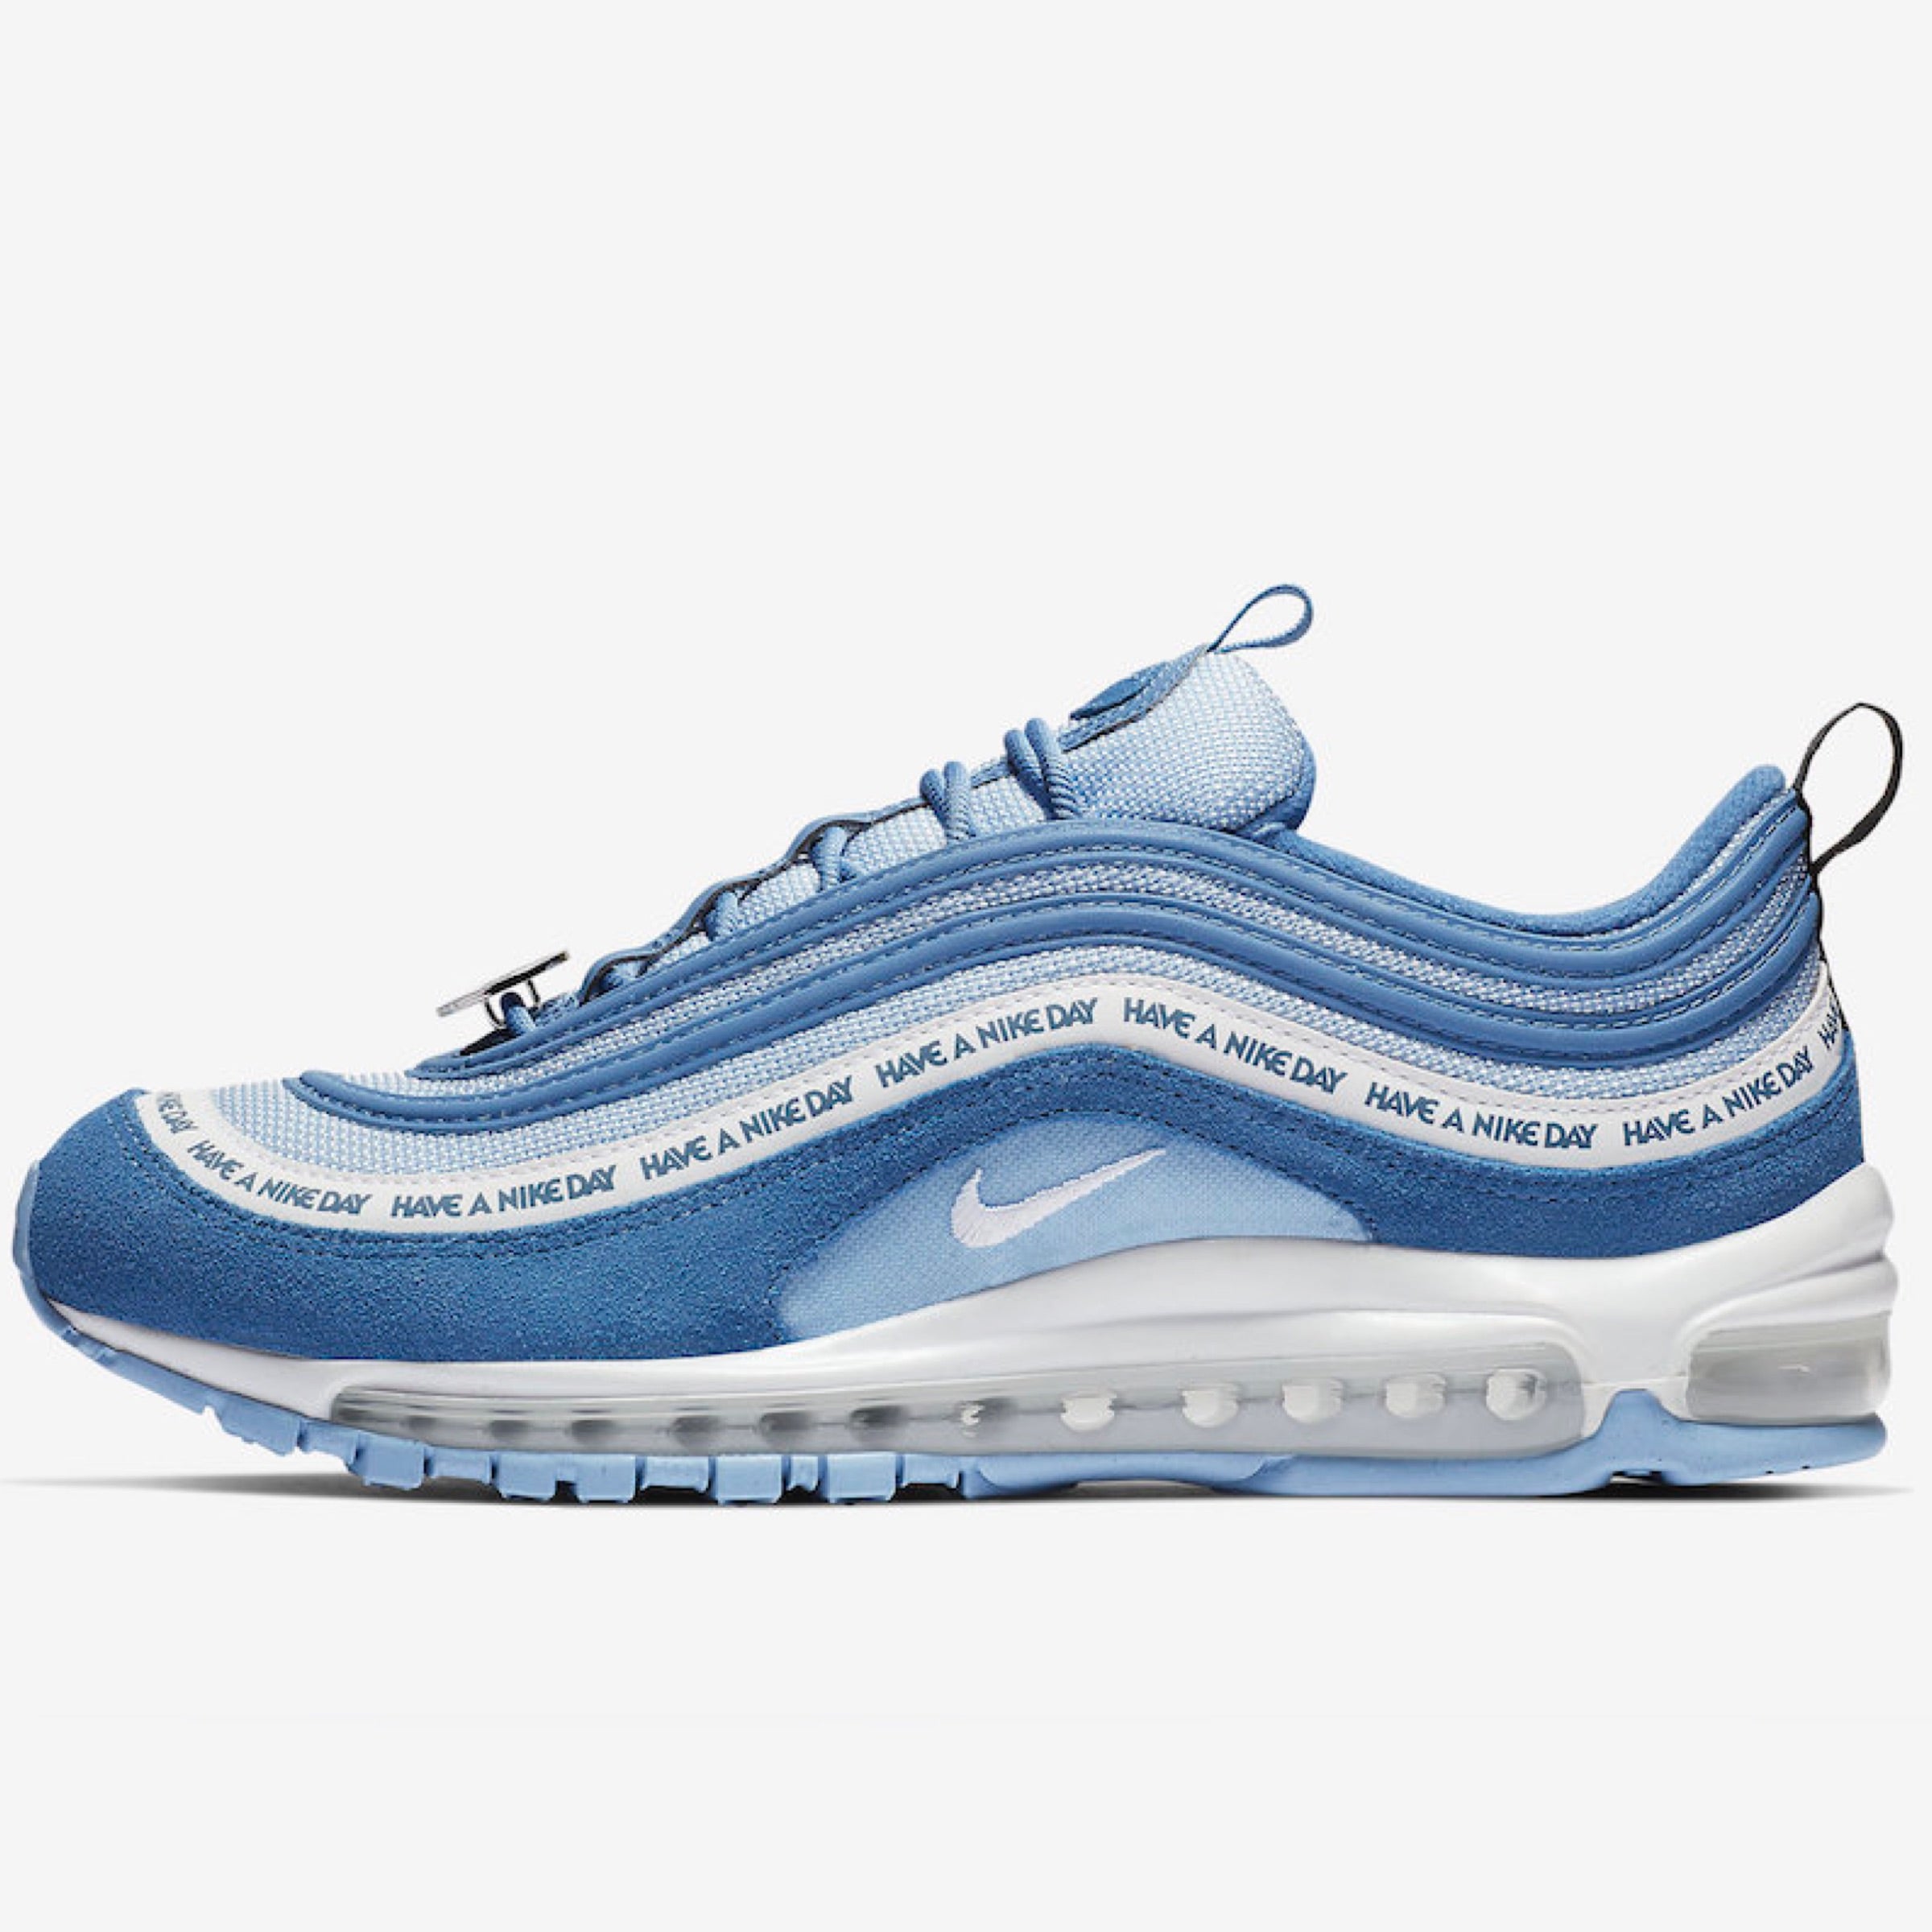 have a nice day 97 air max